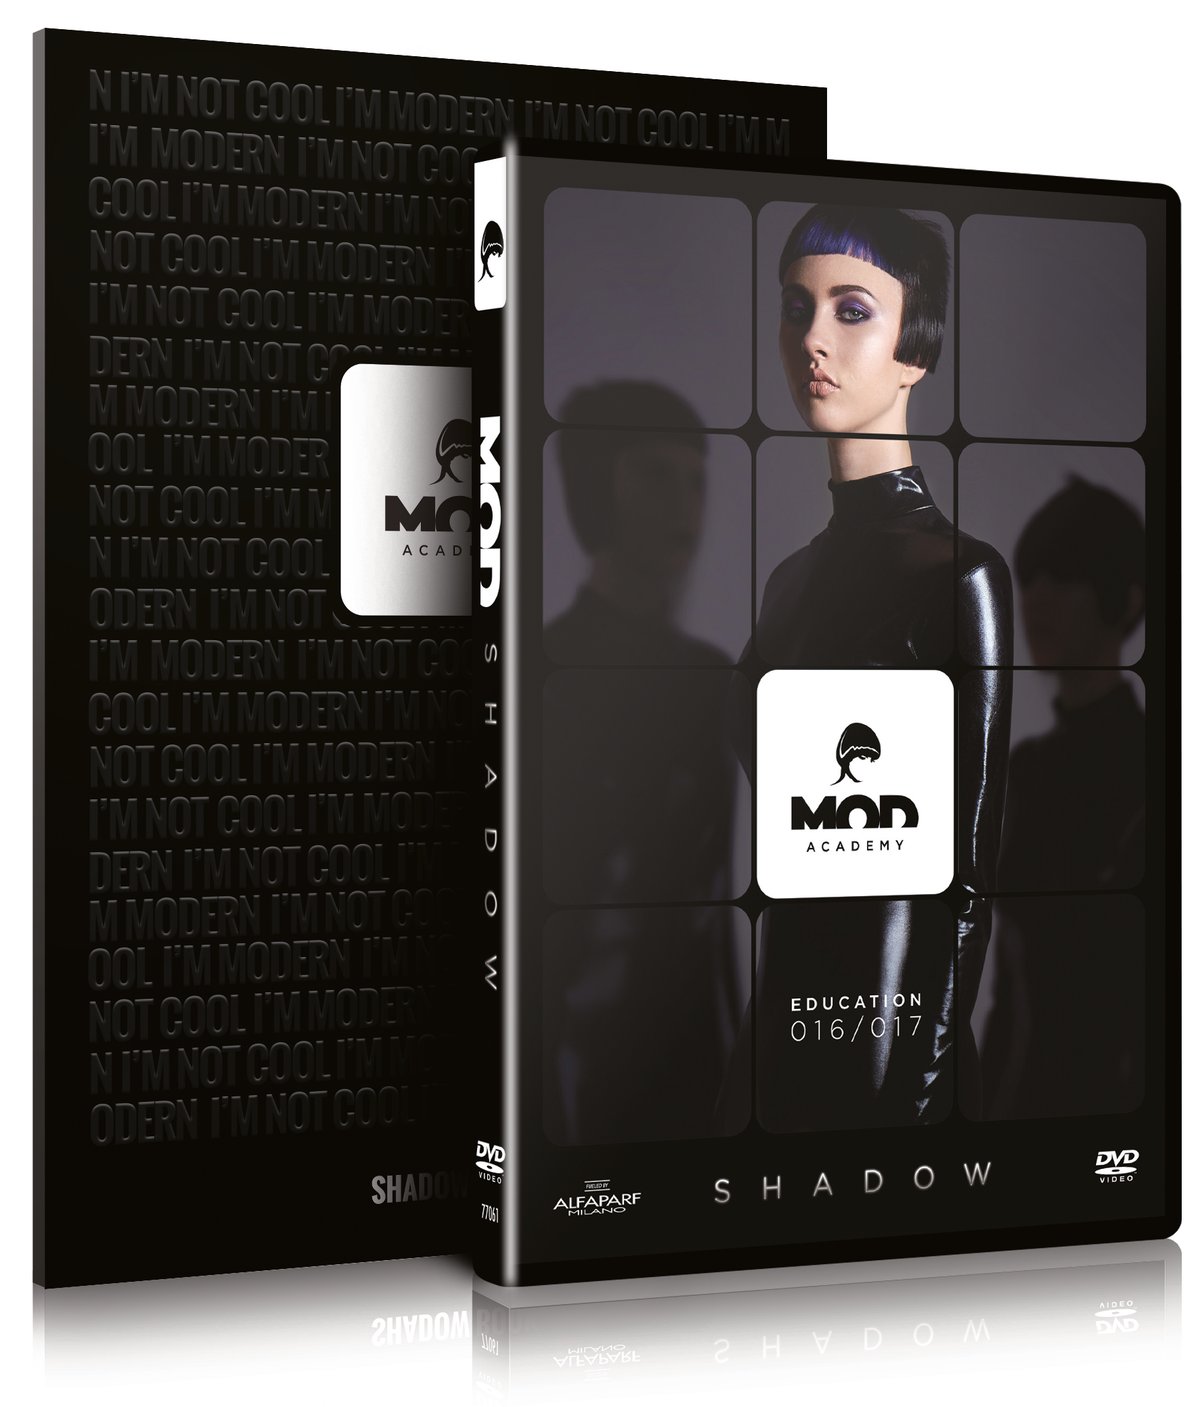 Image of Shadow Collection DVD + Shadow Book / Education 2016/2017